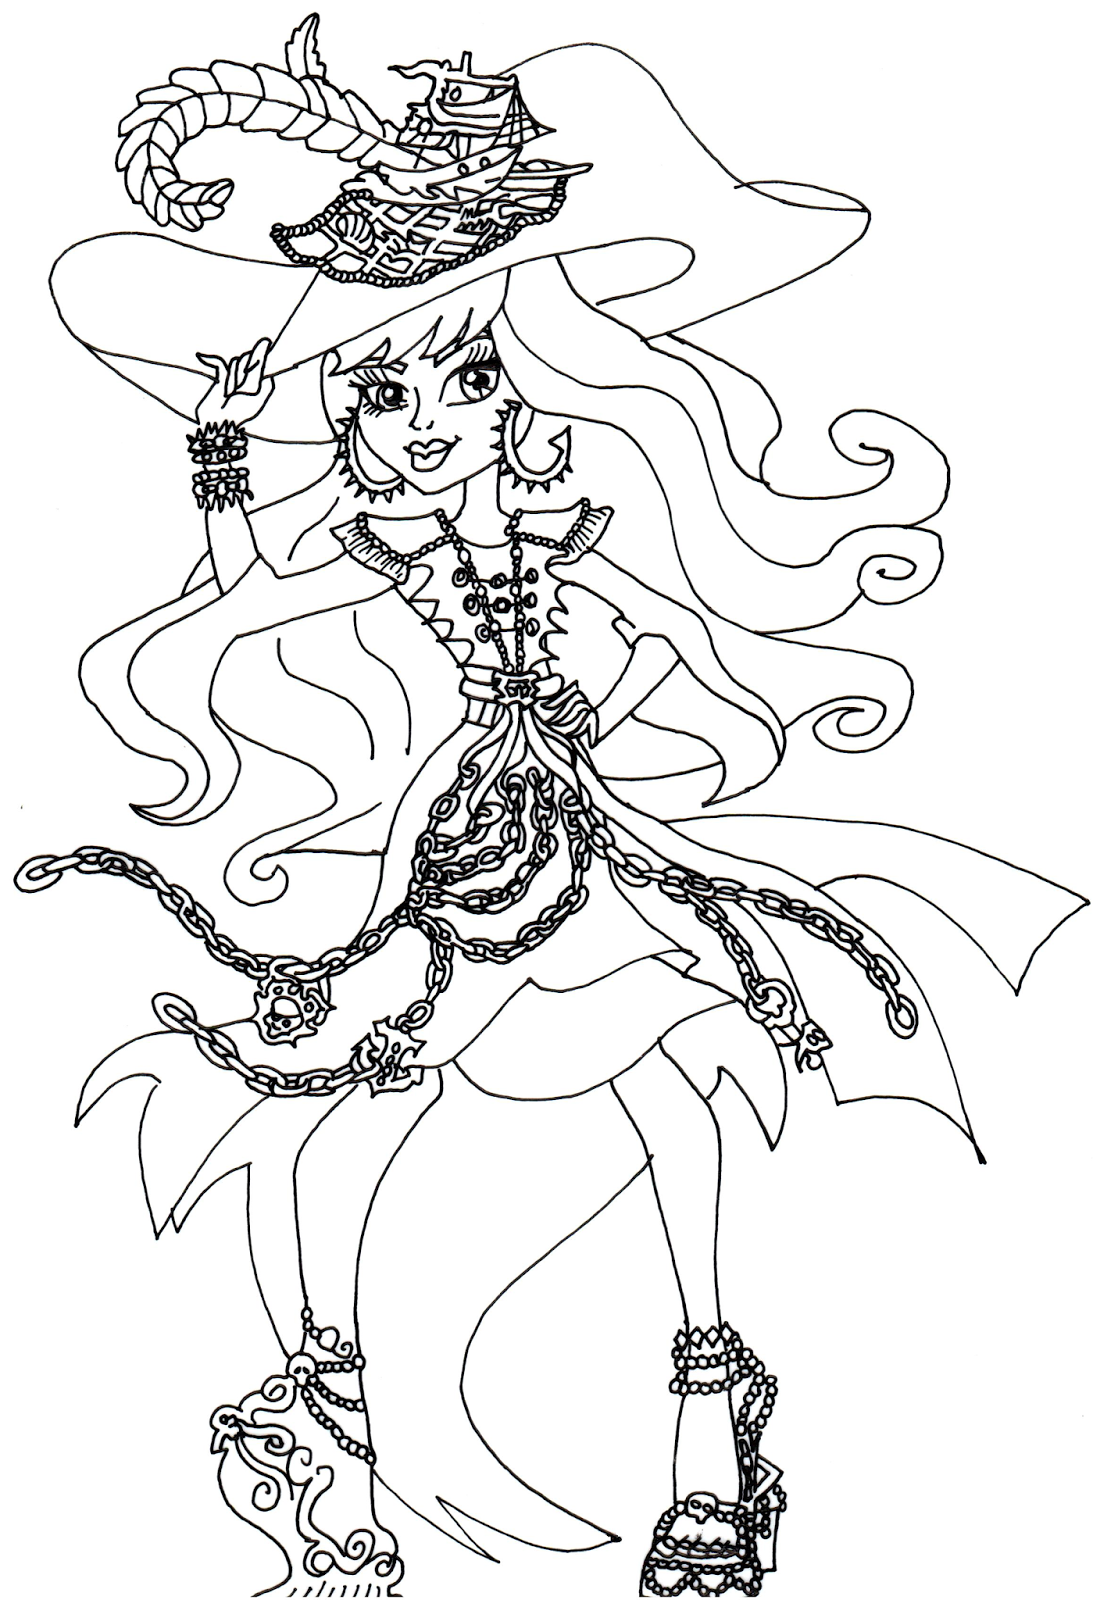 Free Printable Monster High Coloring Pages: Vandala Doubloons Monster